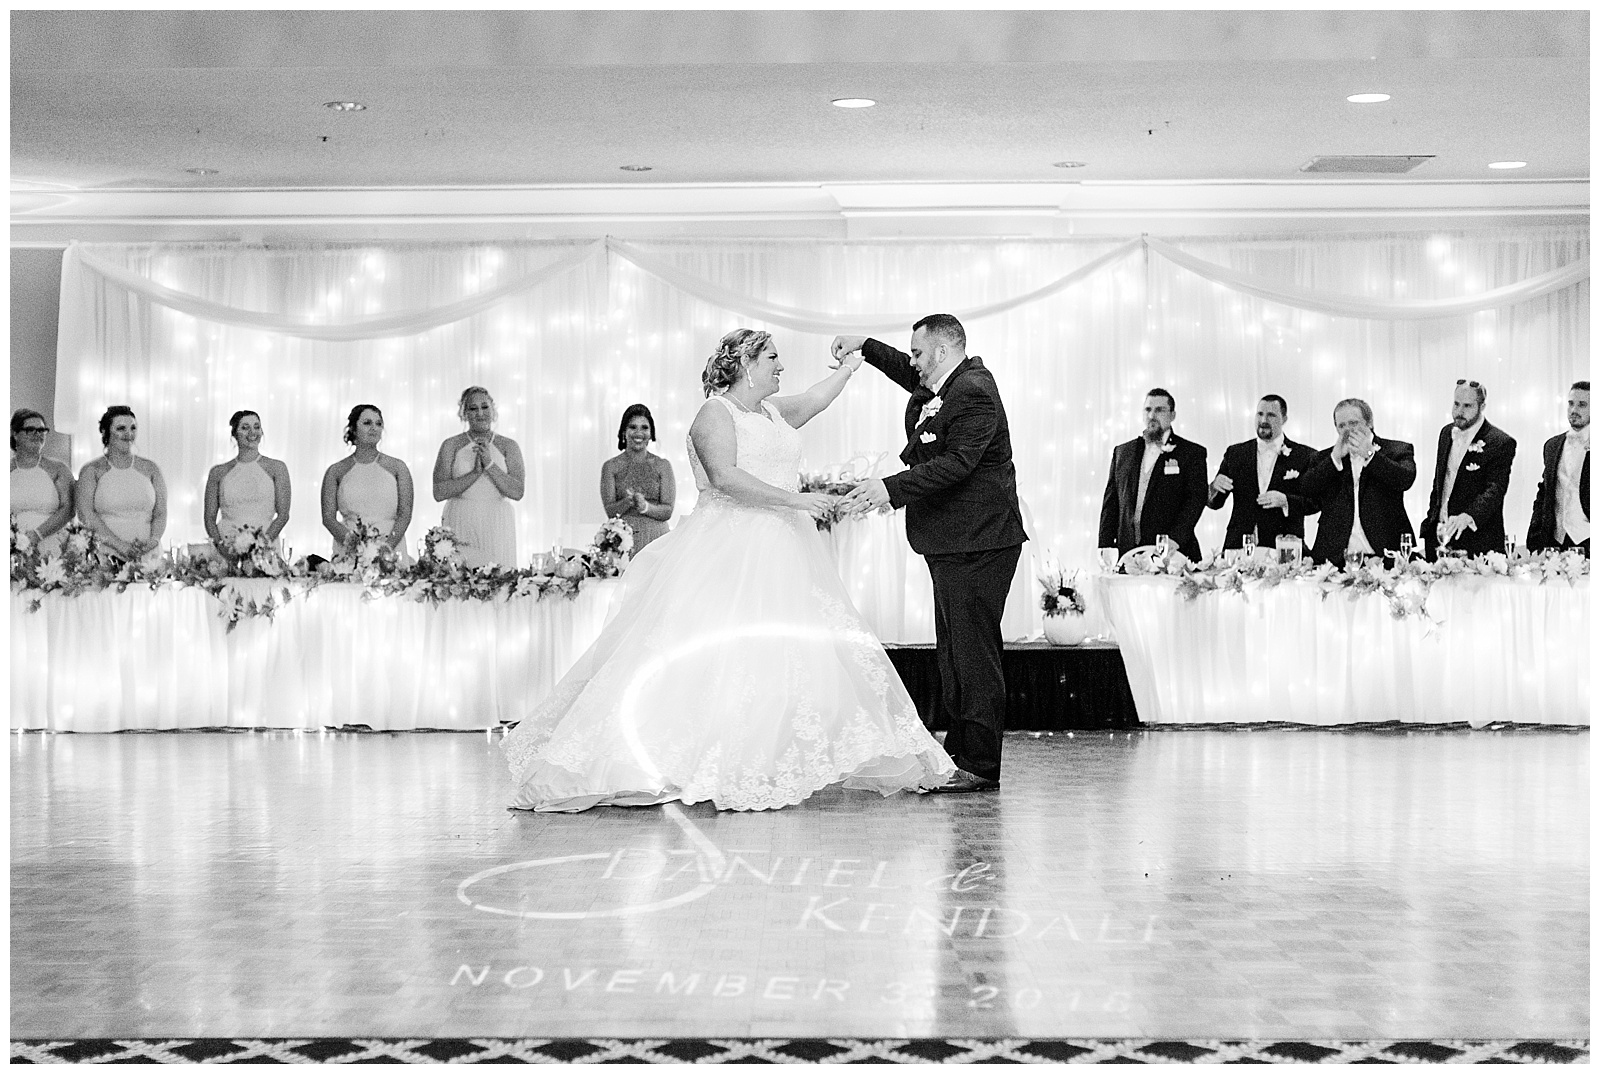 Bride and groom share first dance during their Fairlane Club Fall Wedding.